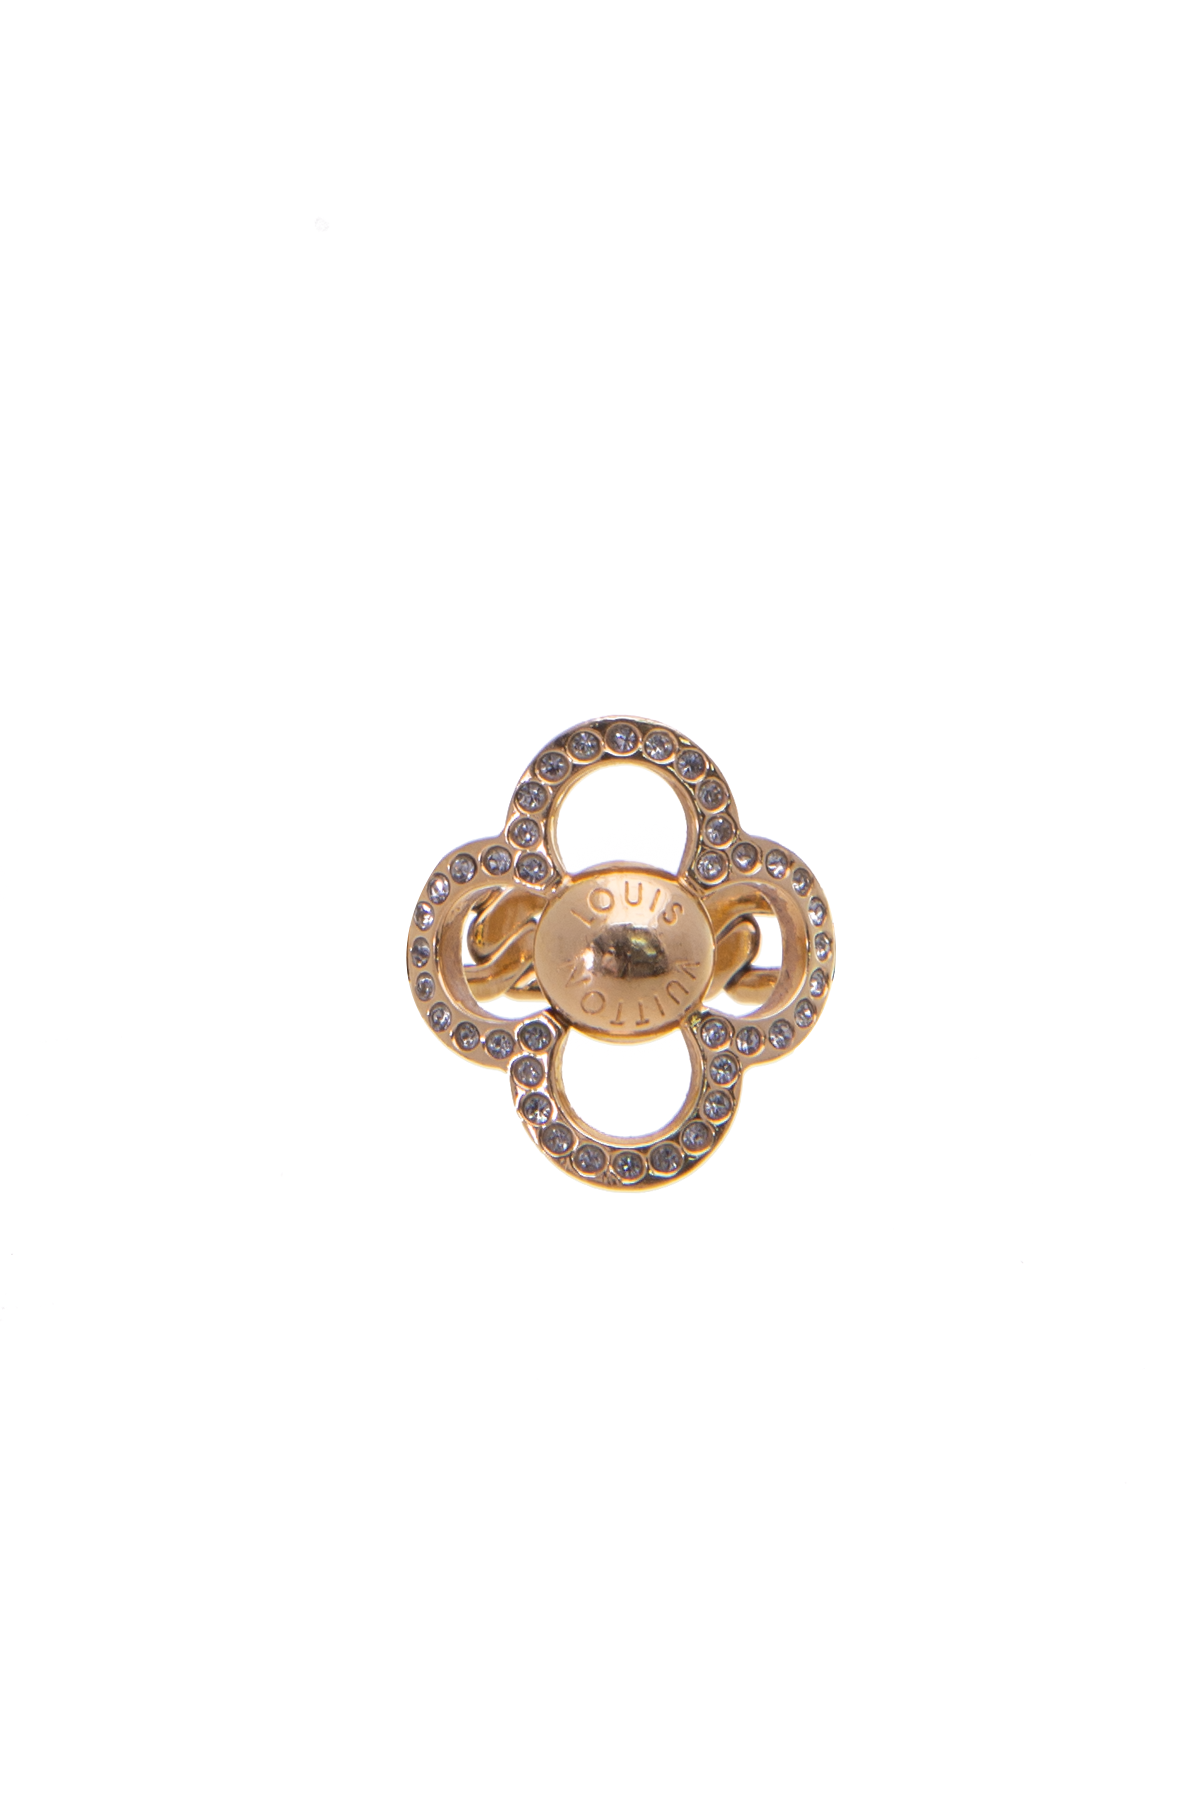 Louis Vuitton Crystal Flower Power Ring - Size 6.25 - Couture USA